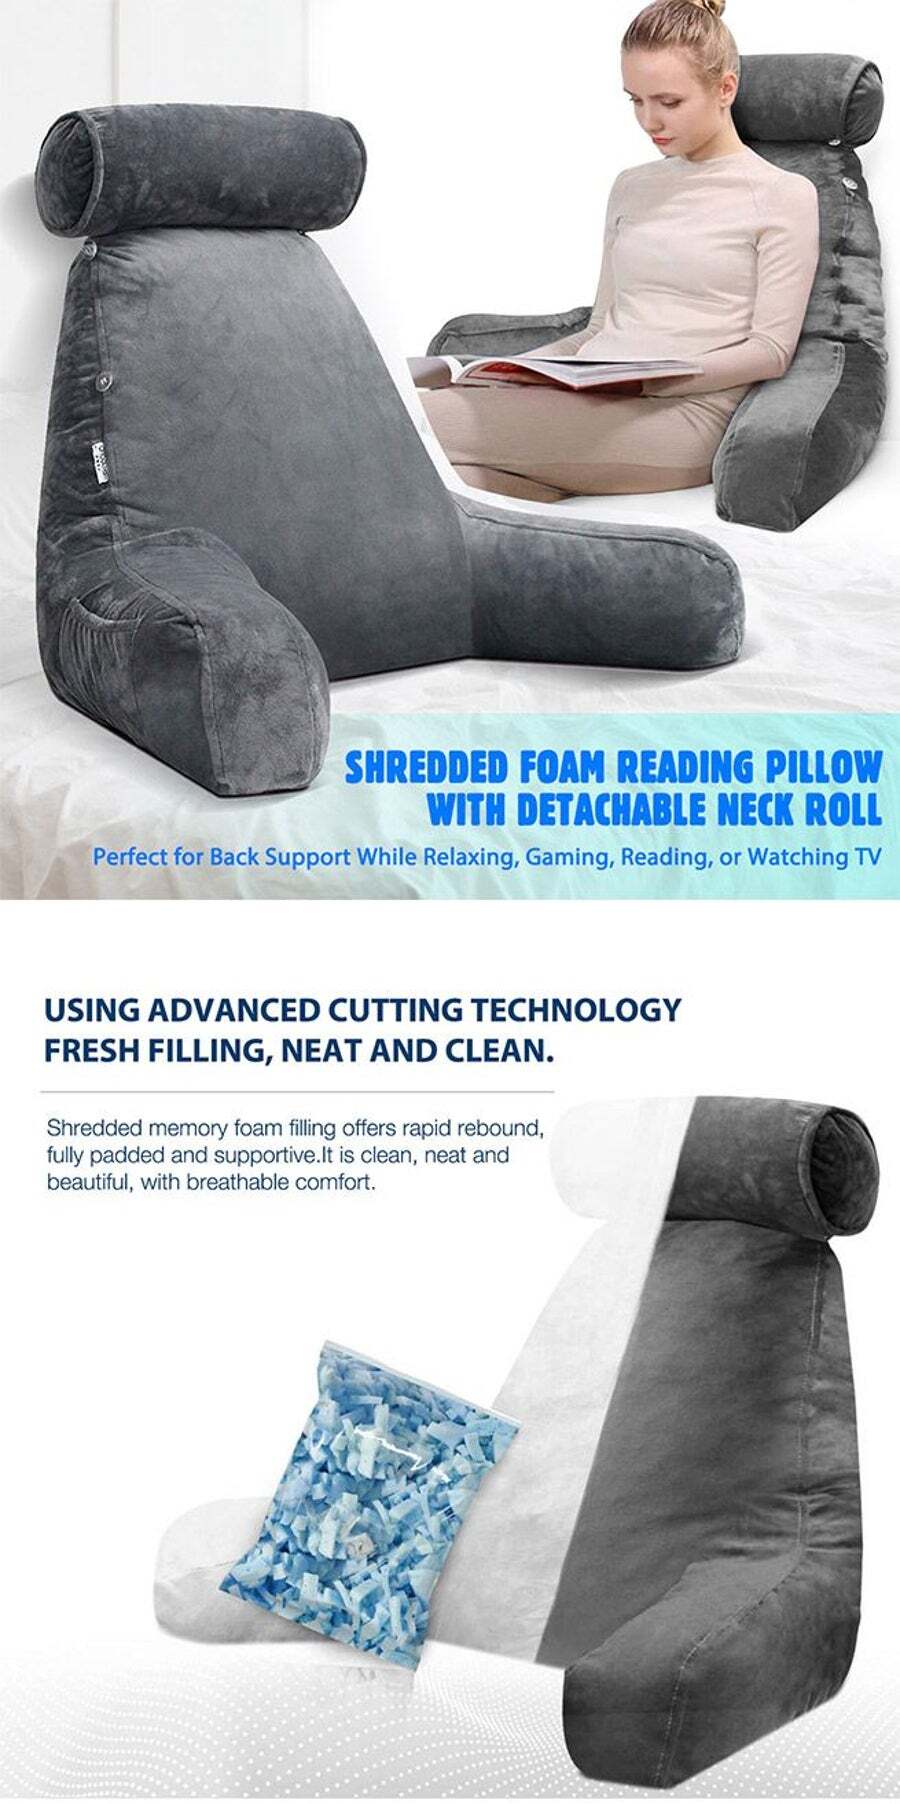  Reading Pillow-Bed Rest Pillow with Detachable Neck Roll &  Higher Support Arm for Sitting in Bed Couch or Floor-Backrest Reading Pillow  Adult Back Pillow for Reading/Watching TV/Gaming/Relaxing : Home & Kitchen